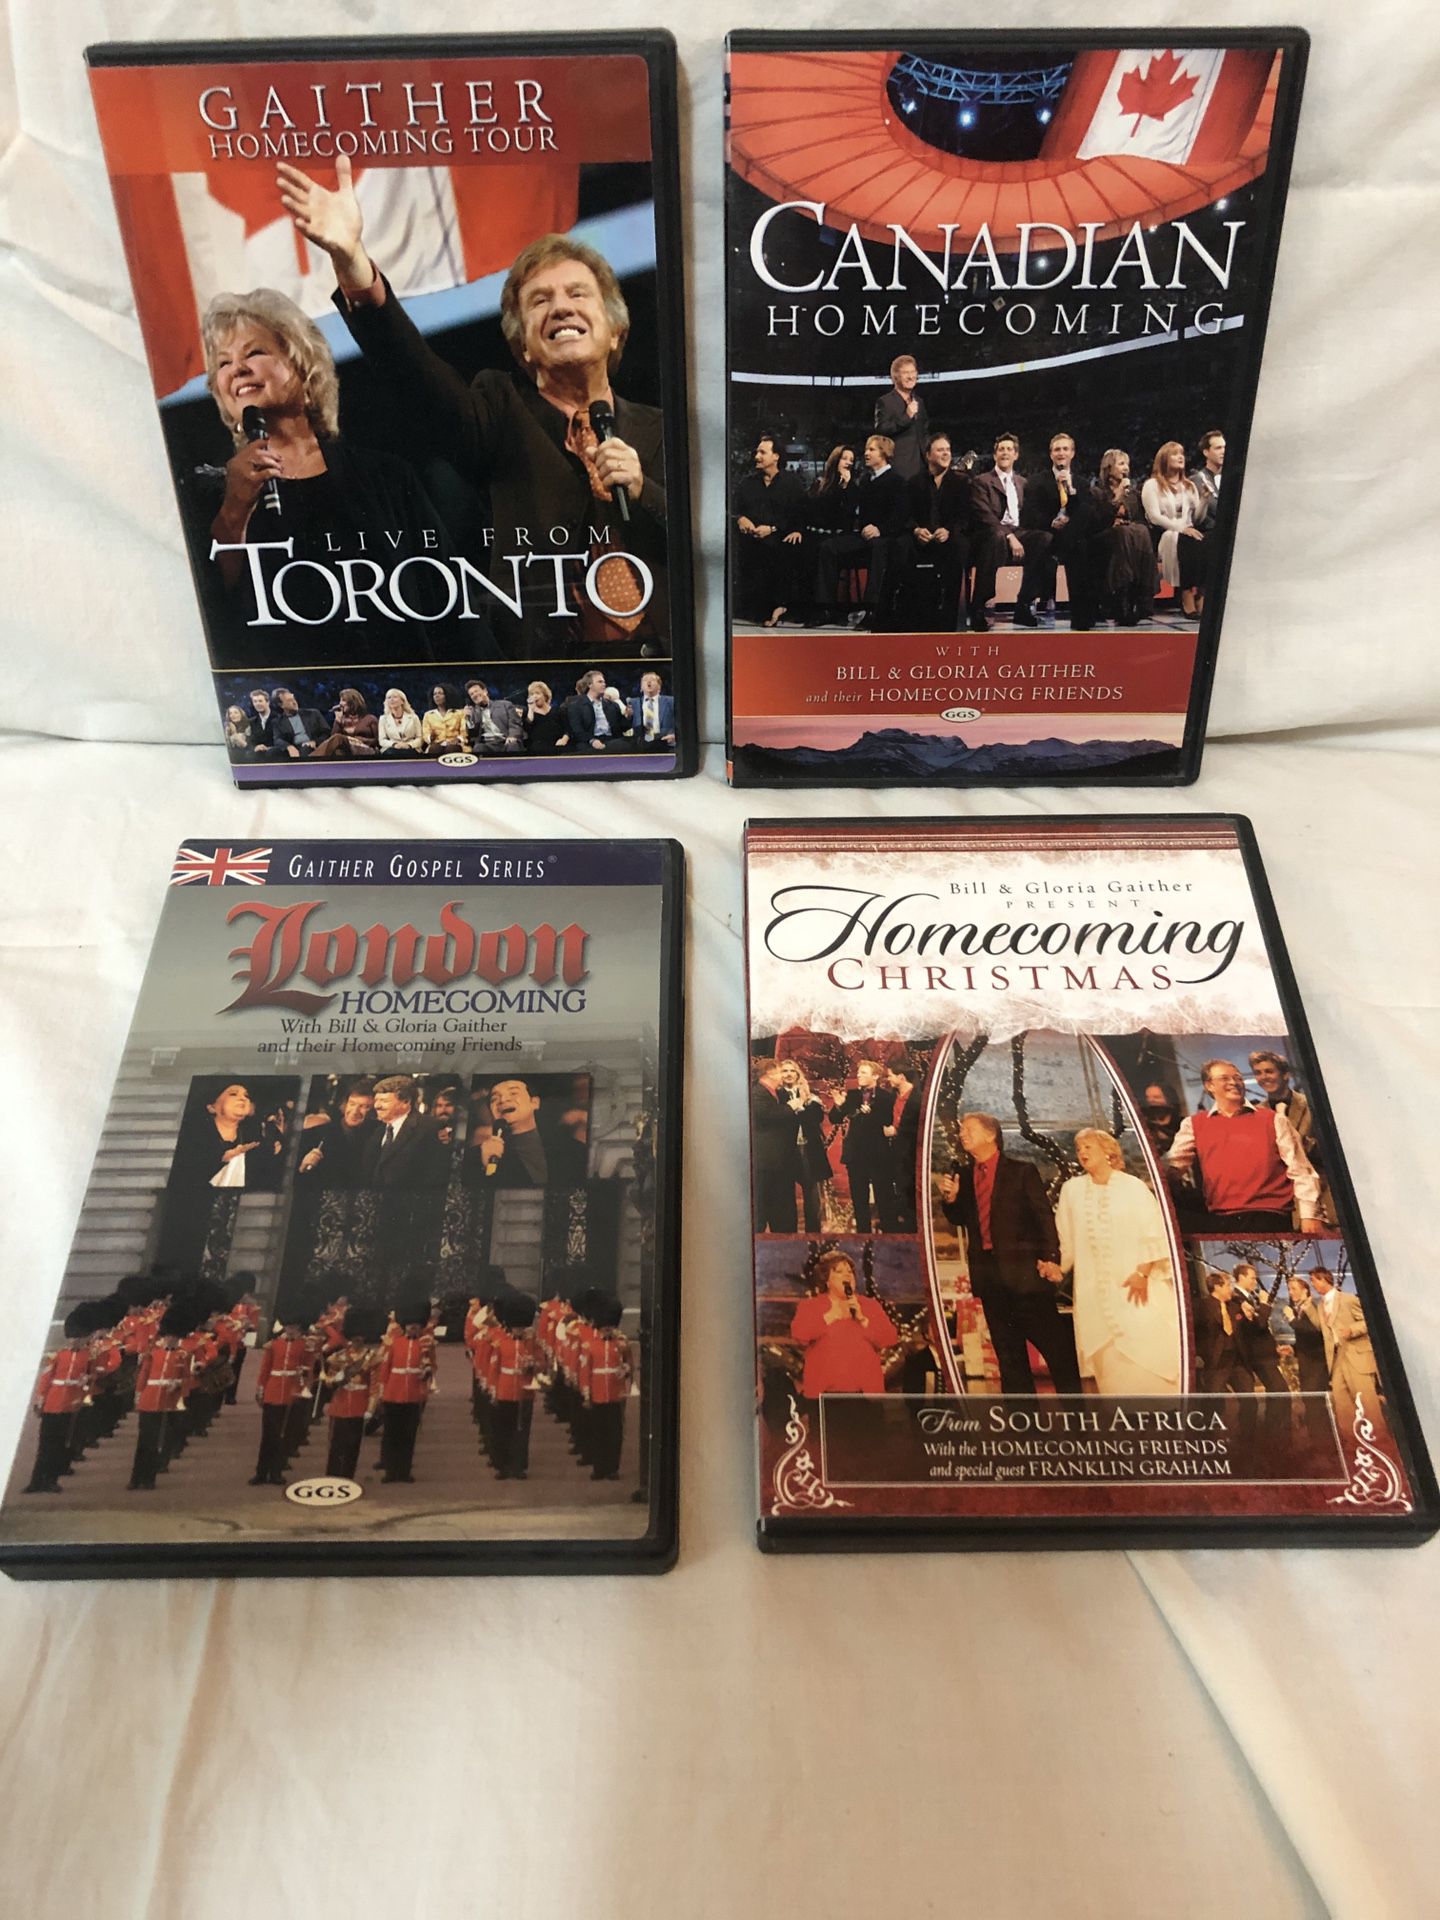 4 Gaither Gospel Series DVDs: Gaither Homecoming Tours